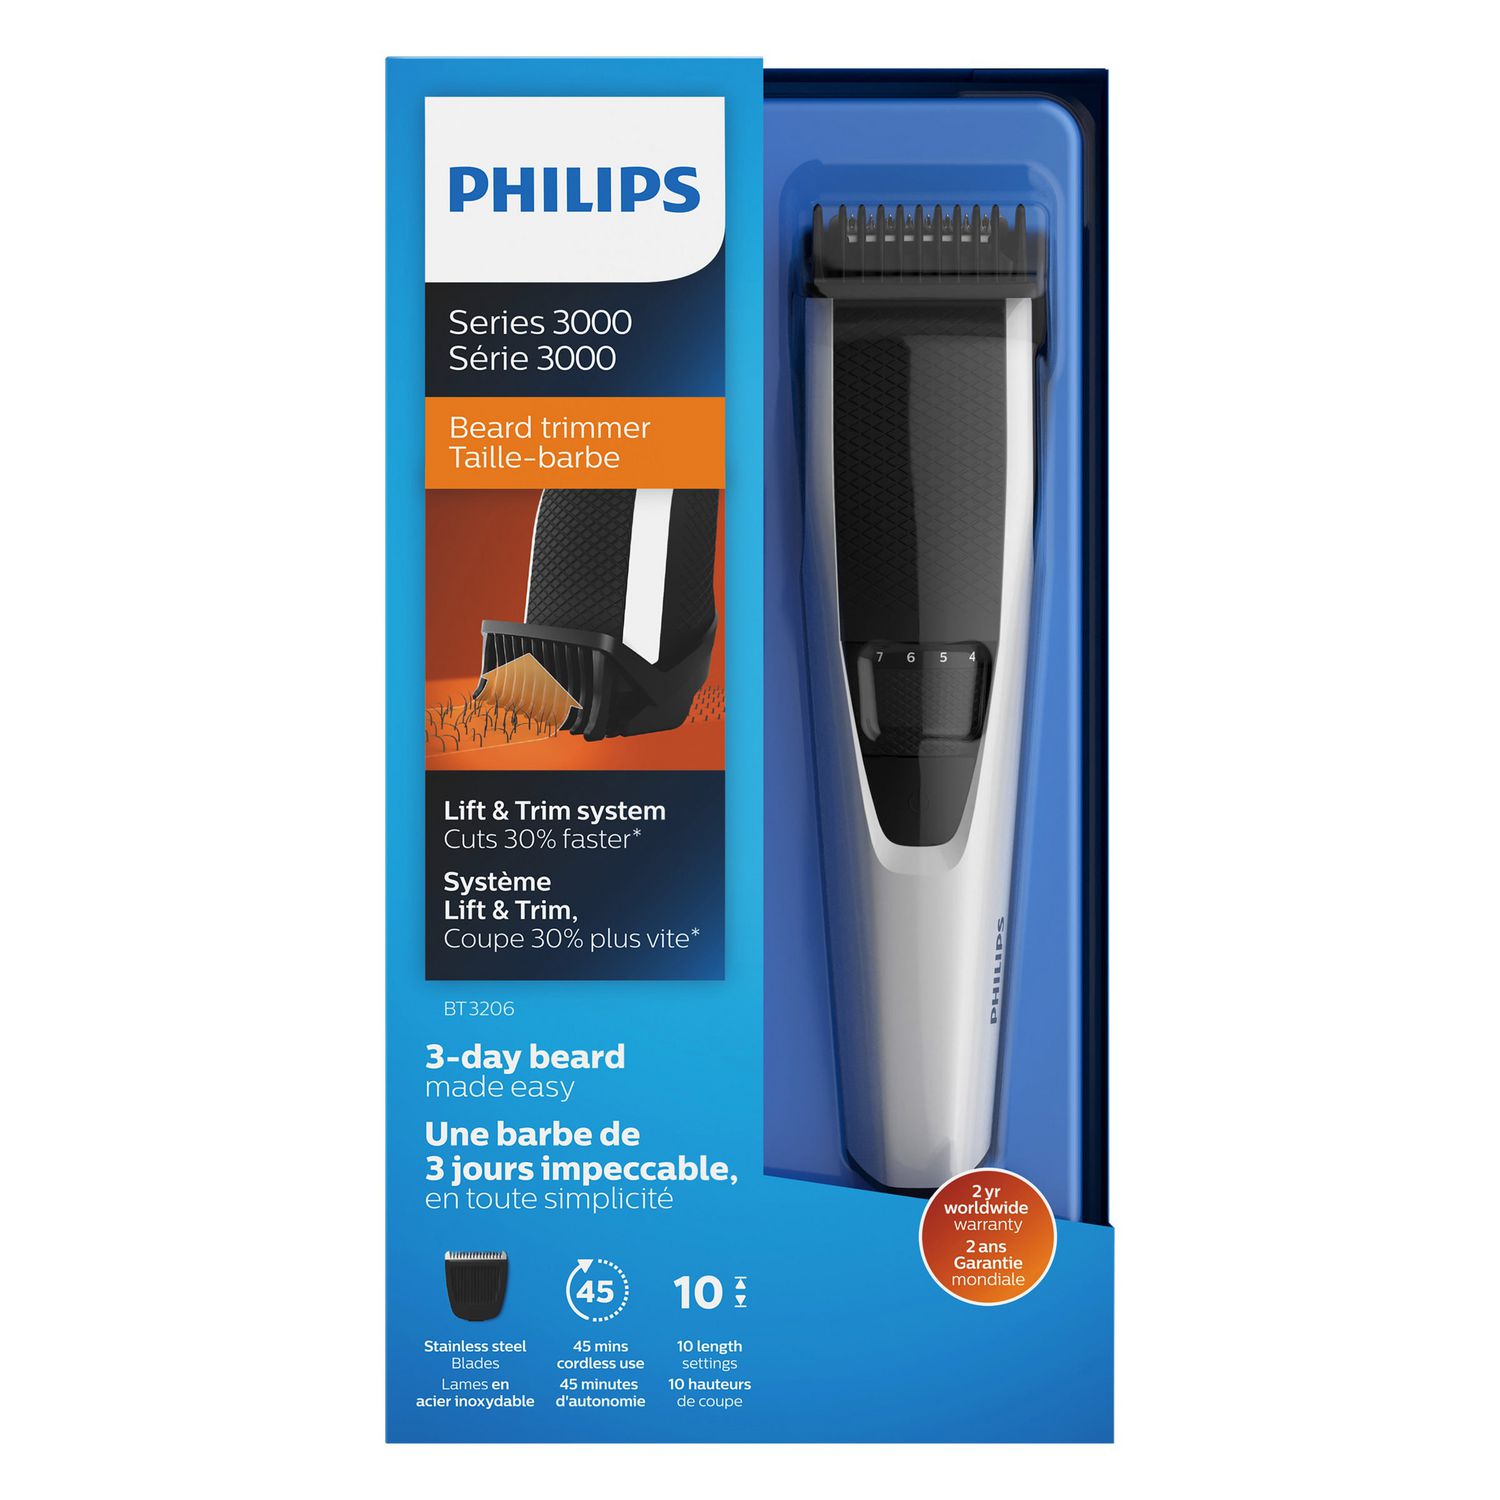 easy to use beard trimmer